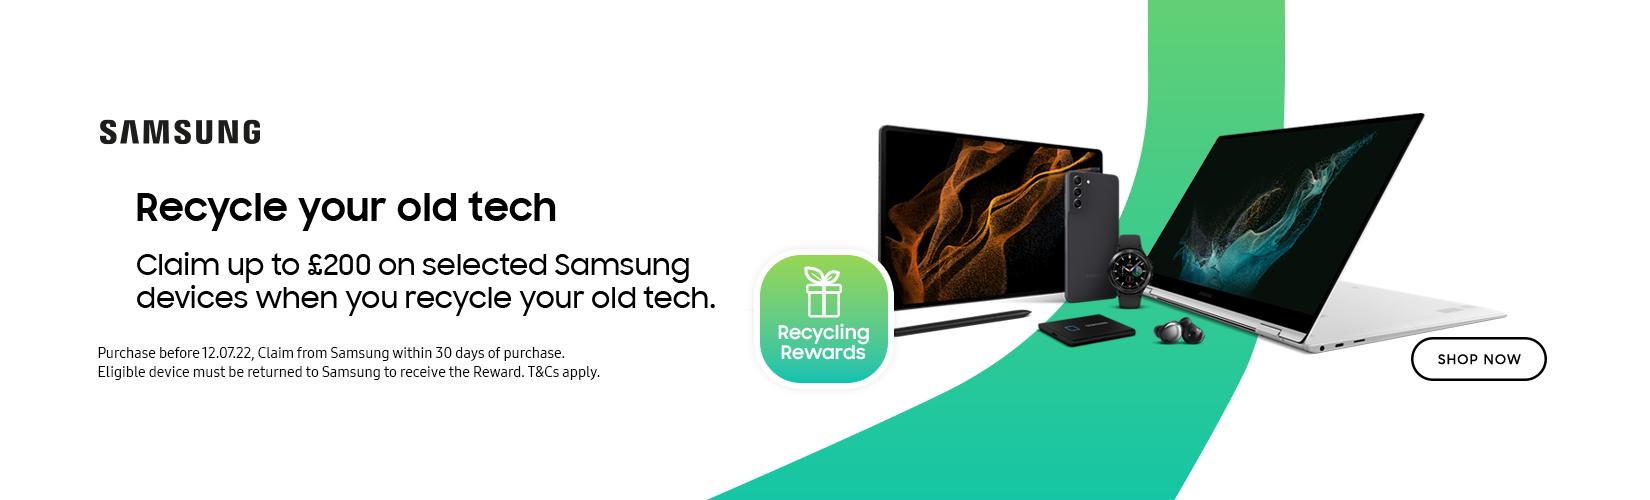 Samsung. Recycle your old tech. Claim up to £200 on selected samsung devices when you recycle your old tech.